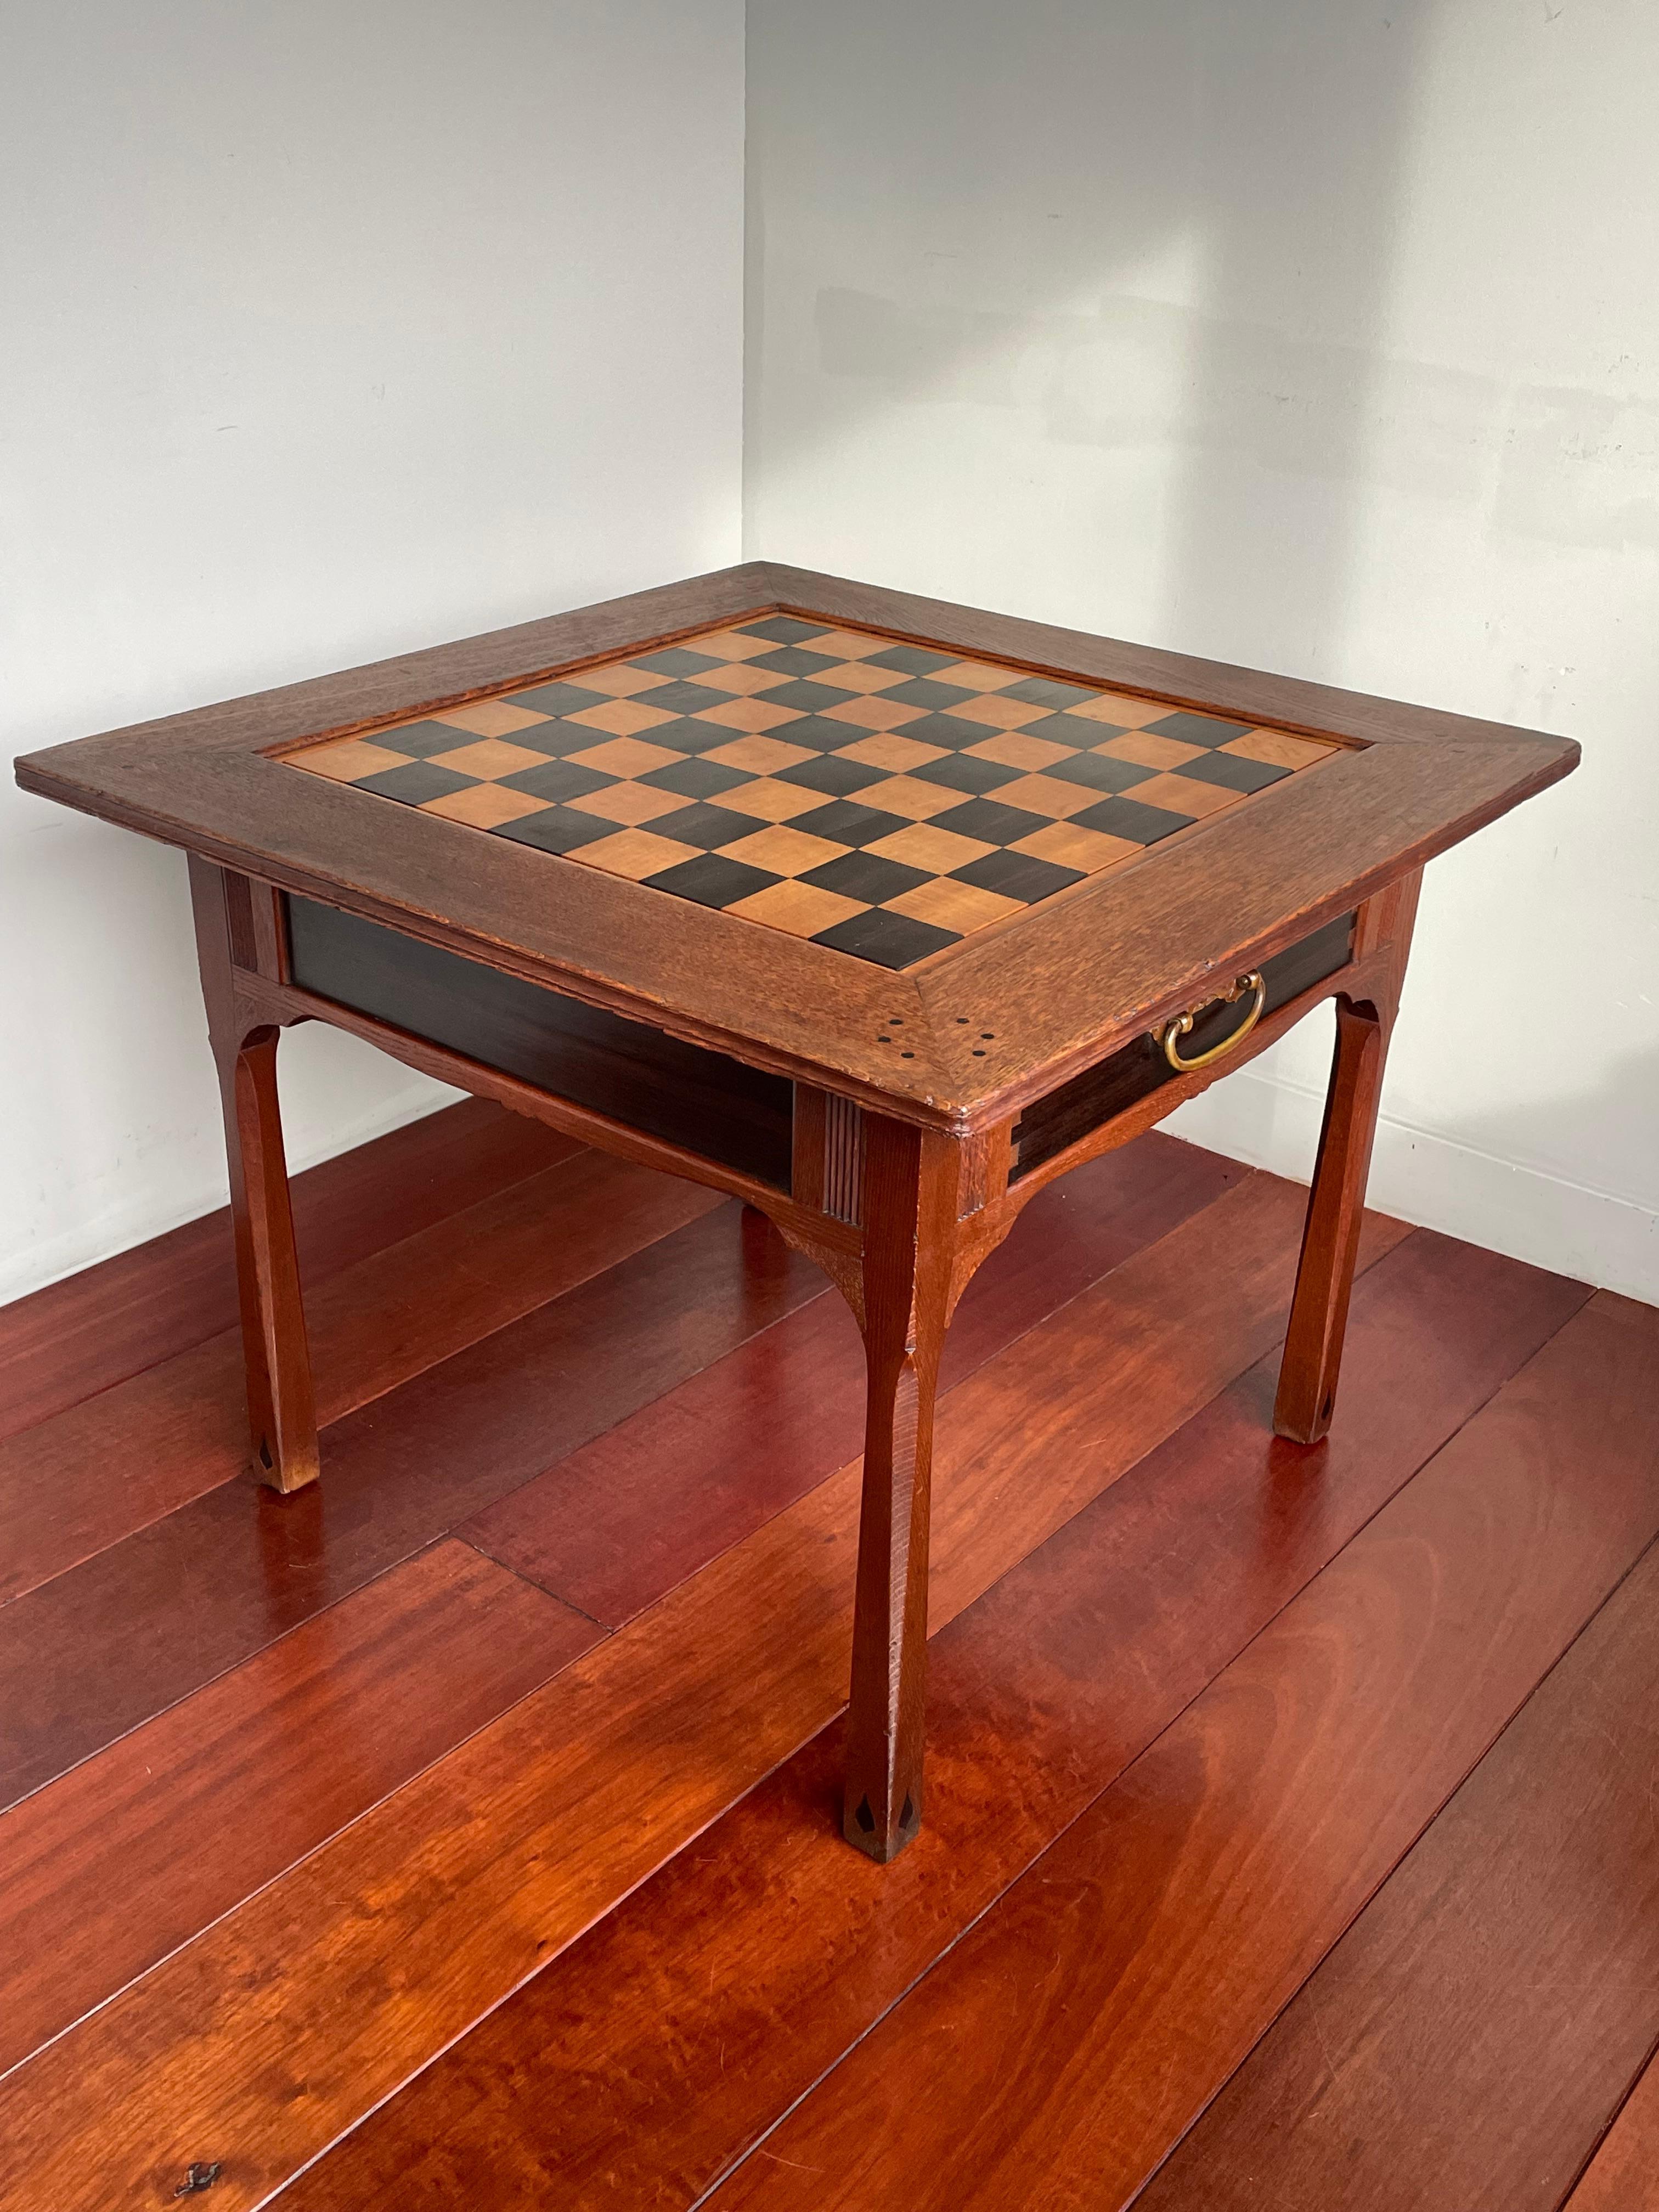 Extremely rare and timeless, Dutch Arts and Crafts chess table.

If you have been selling art and antiques as long as we have then you learn to recognize not only the difference between good quality and top quality, but also between rare and